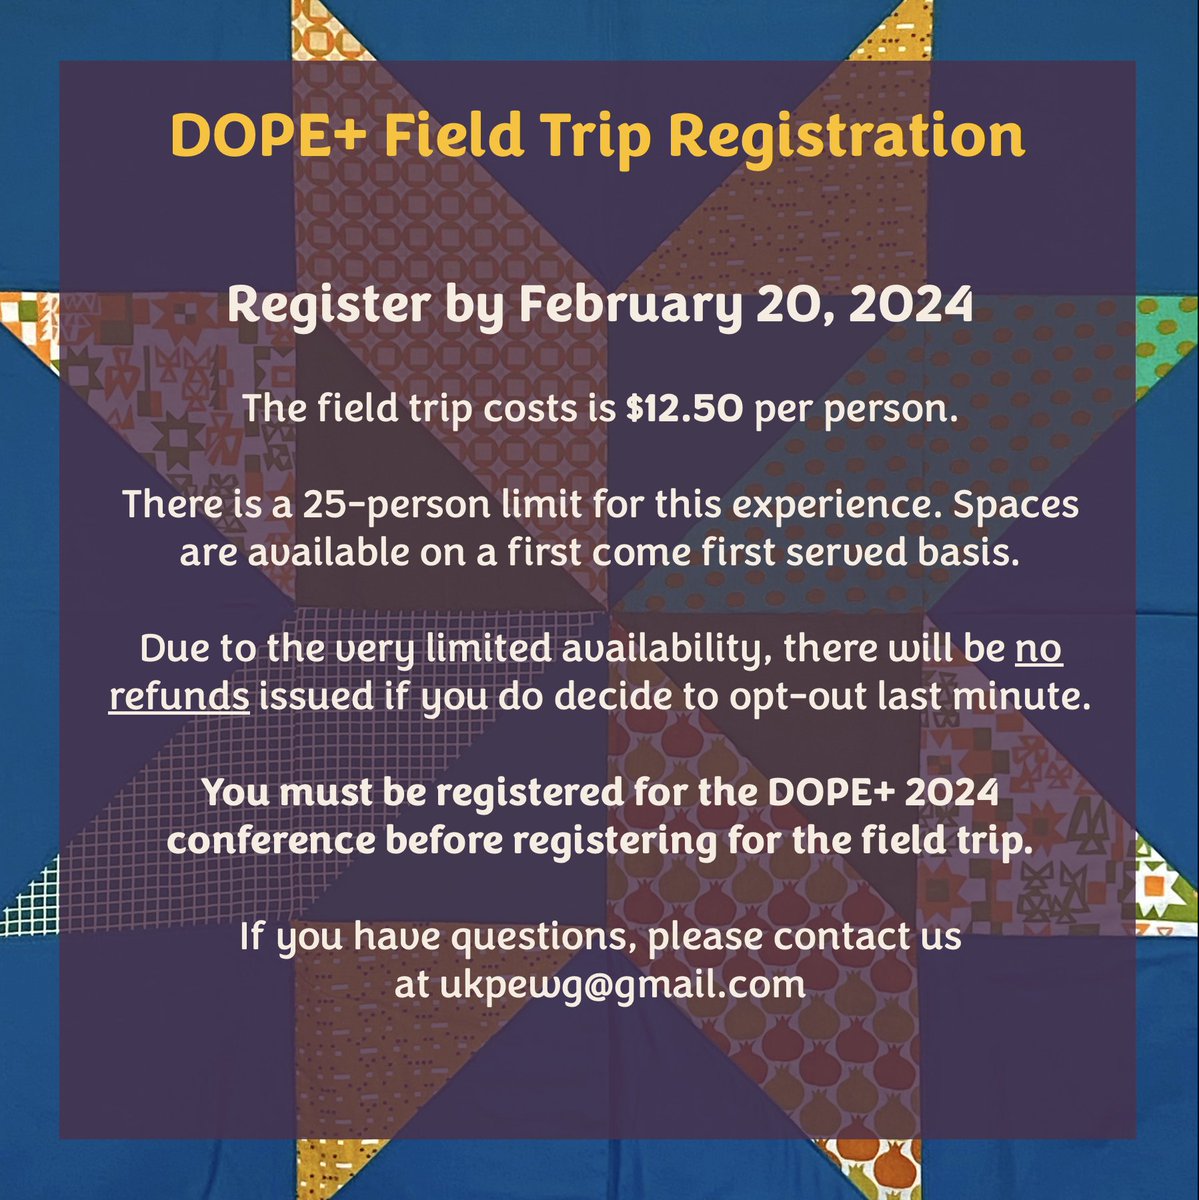 If you're coming to the DOPE+ Conference this year consider joining us on a field trip to the @ukfoodconnect for a hands on cooking class with Chef Tanya! Registration: forms.as.uky.edu/dope-2024-fiel…